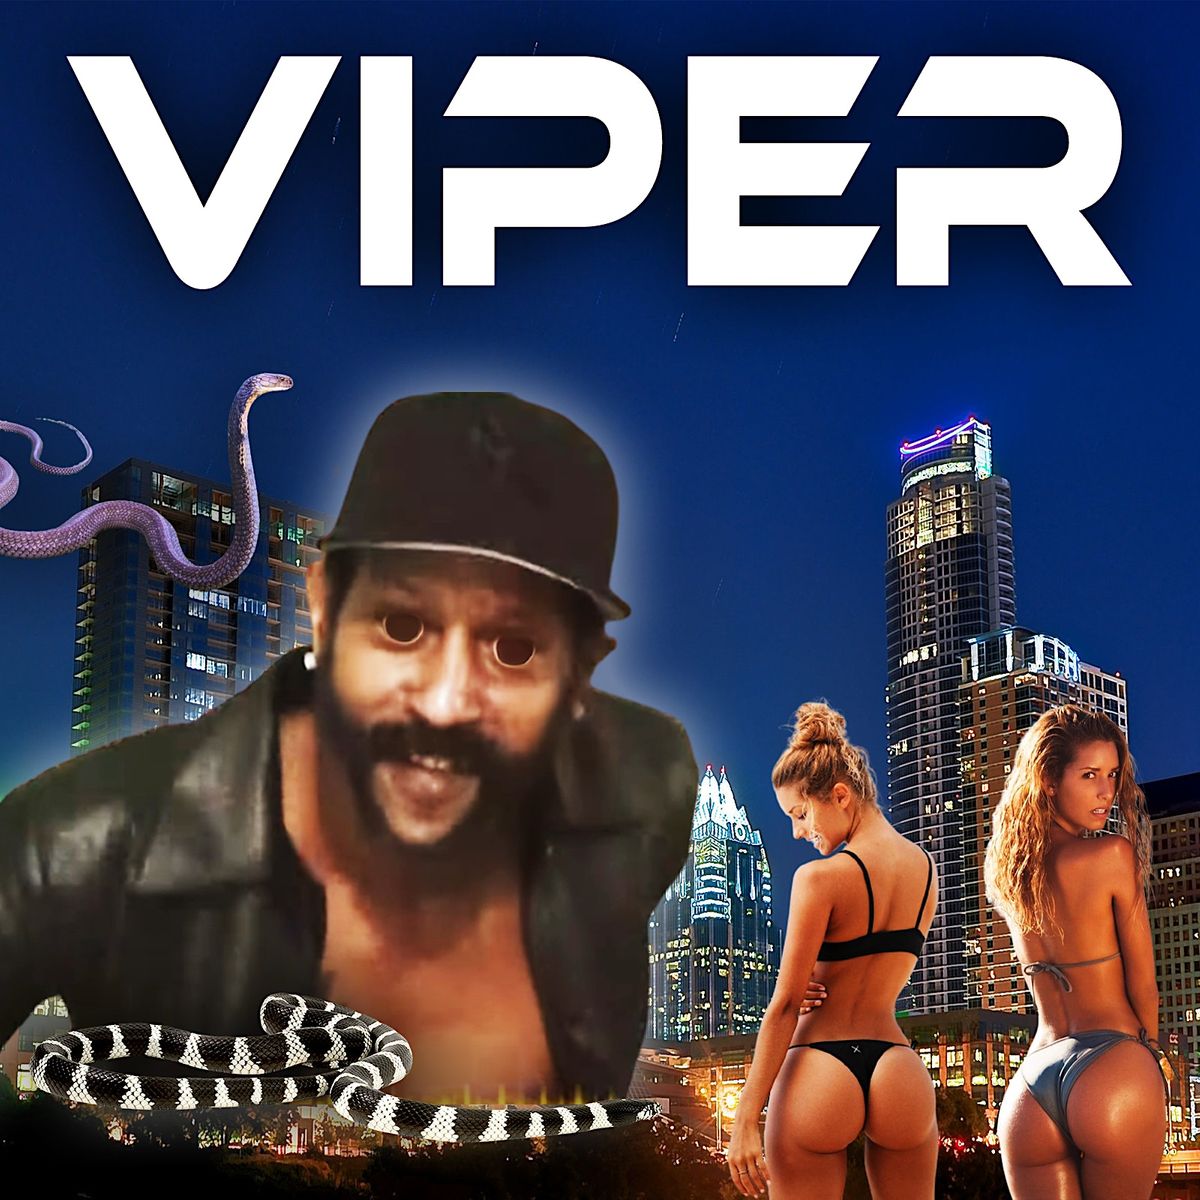 Viper LIVE IN ATLANTA,GA FOR NEW YEAR'S EVE RAP SHOW AT FOUNDRY PAVILION!!!